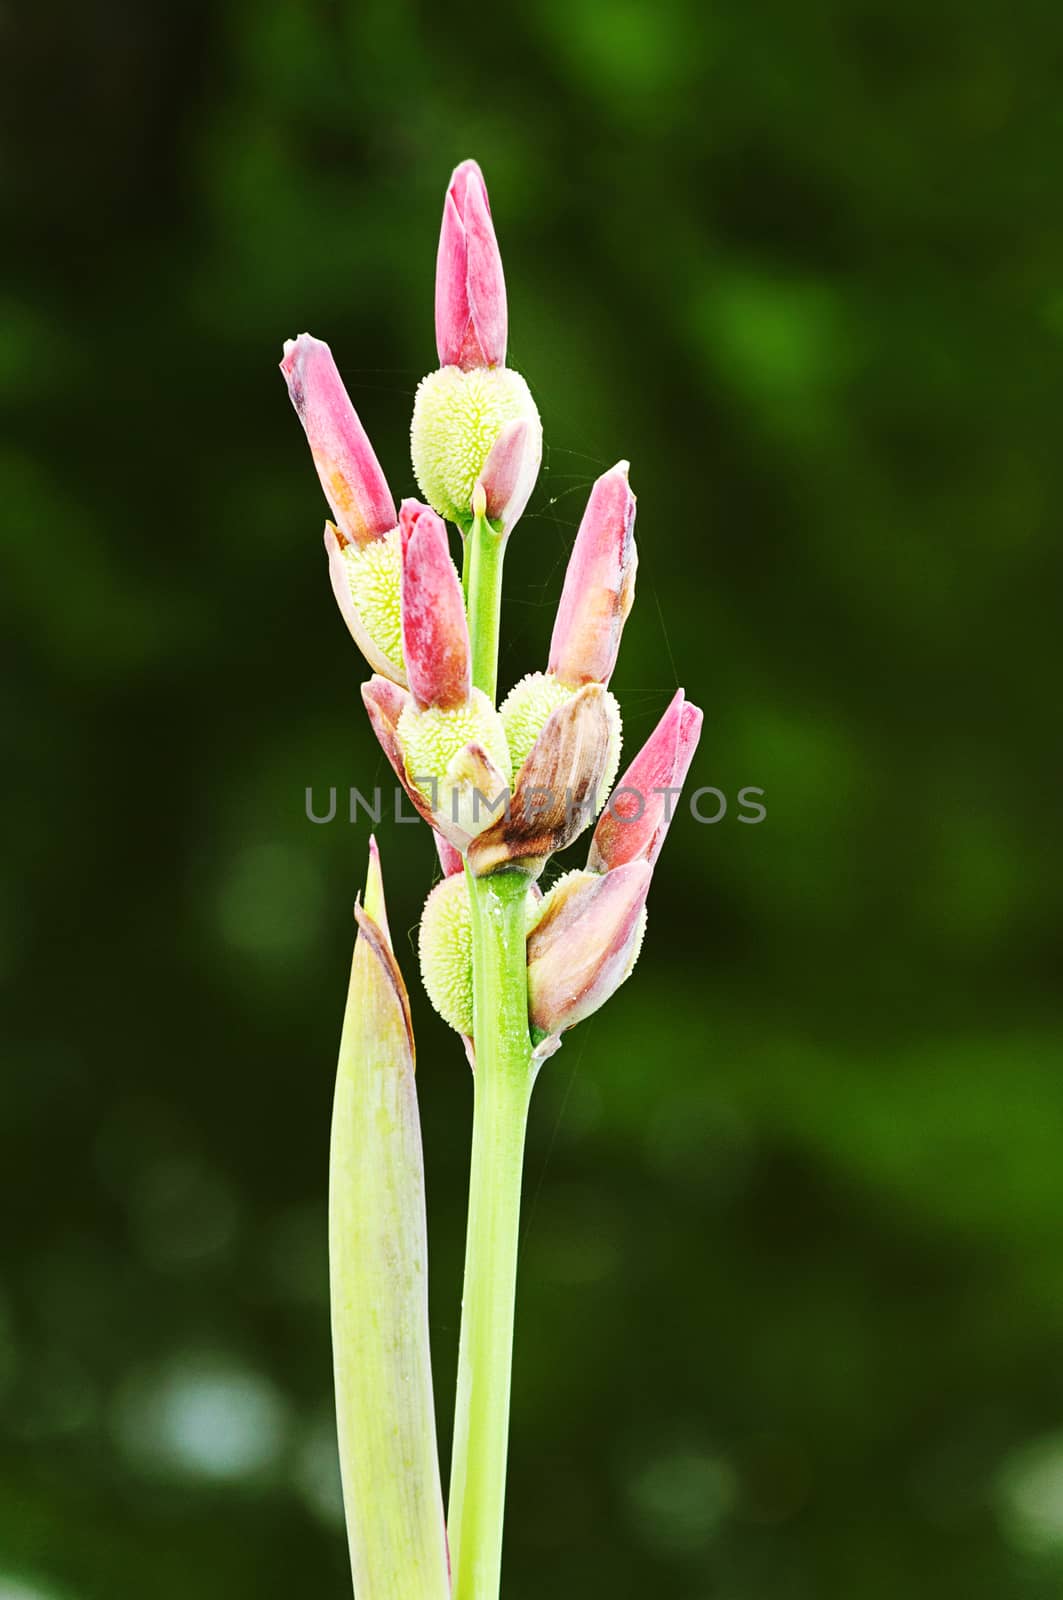 Seed pod of canna flowers by NuwatPhoto